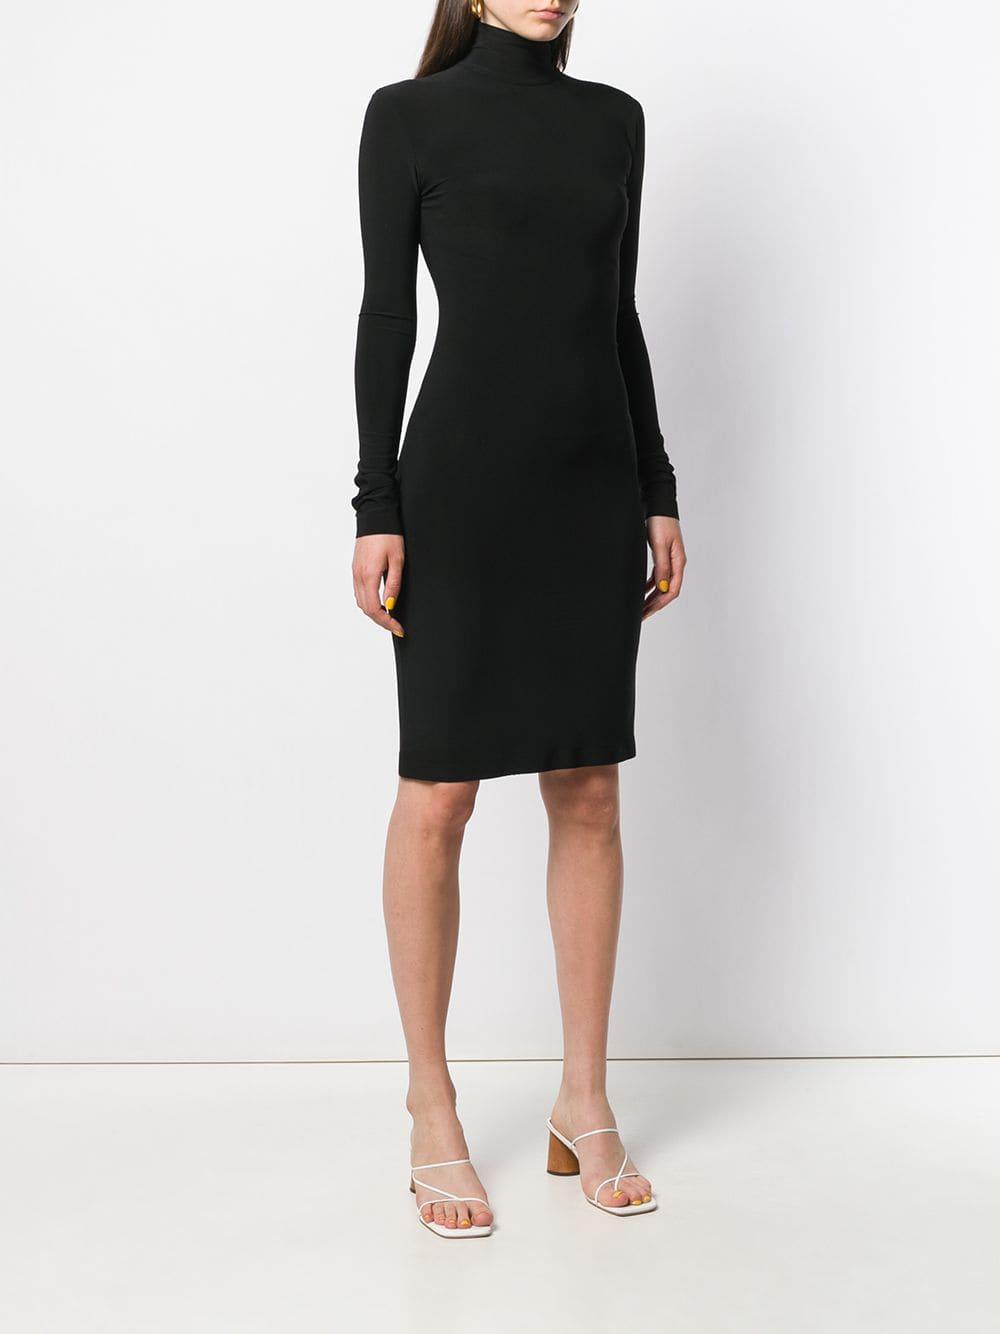 Norma Kamali Synthetic Long-sleeve Fitted Dress in Black - Lyst